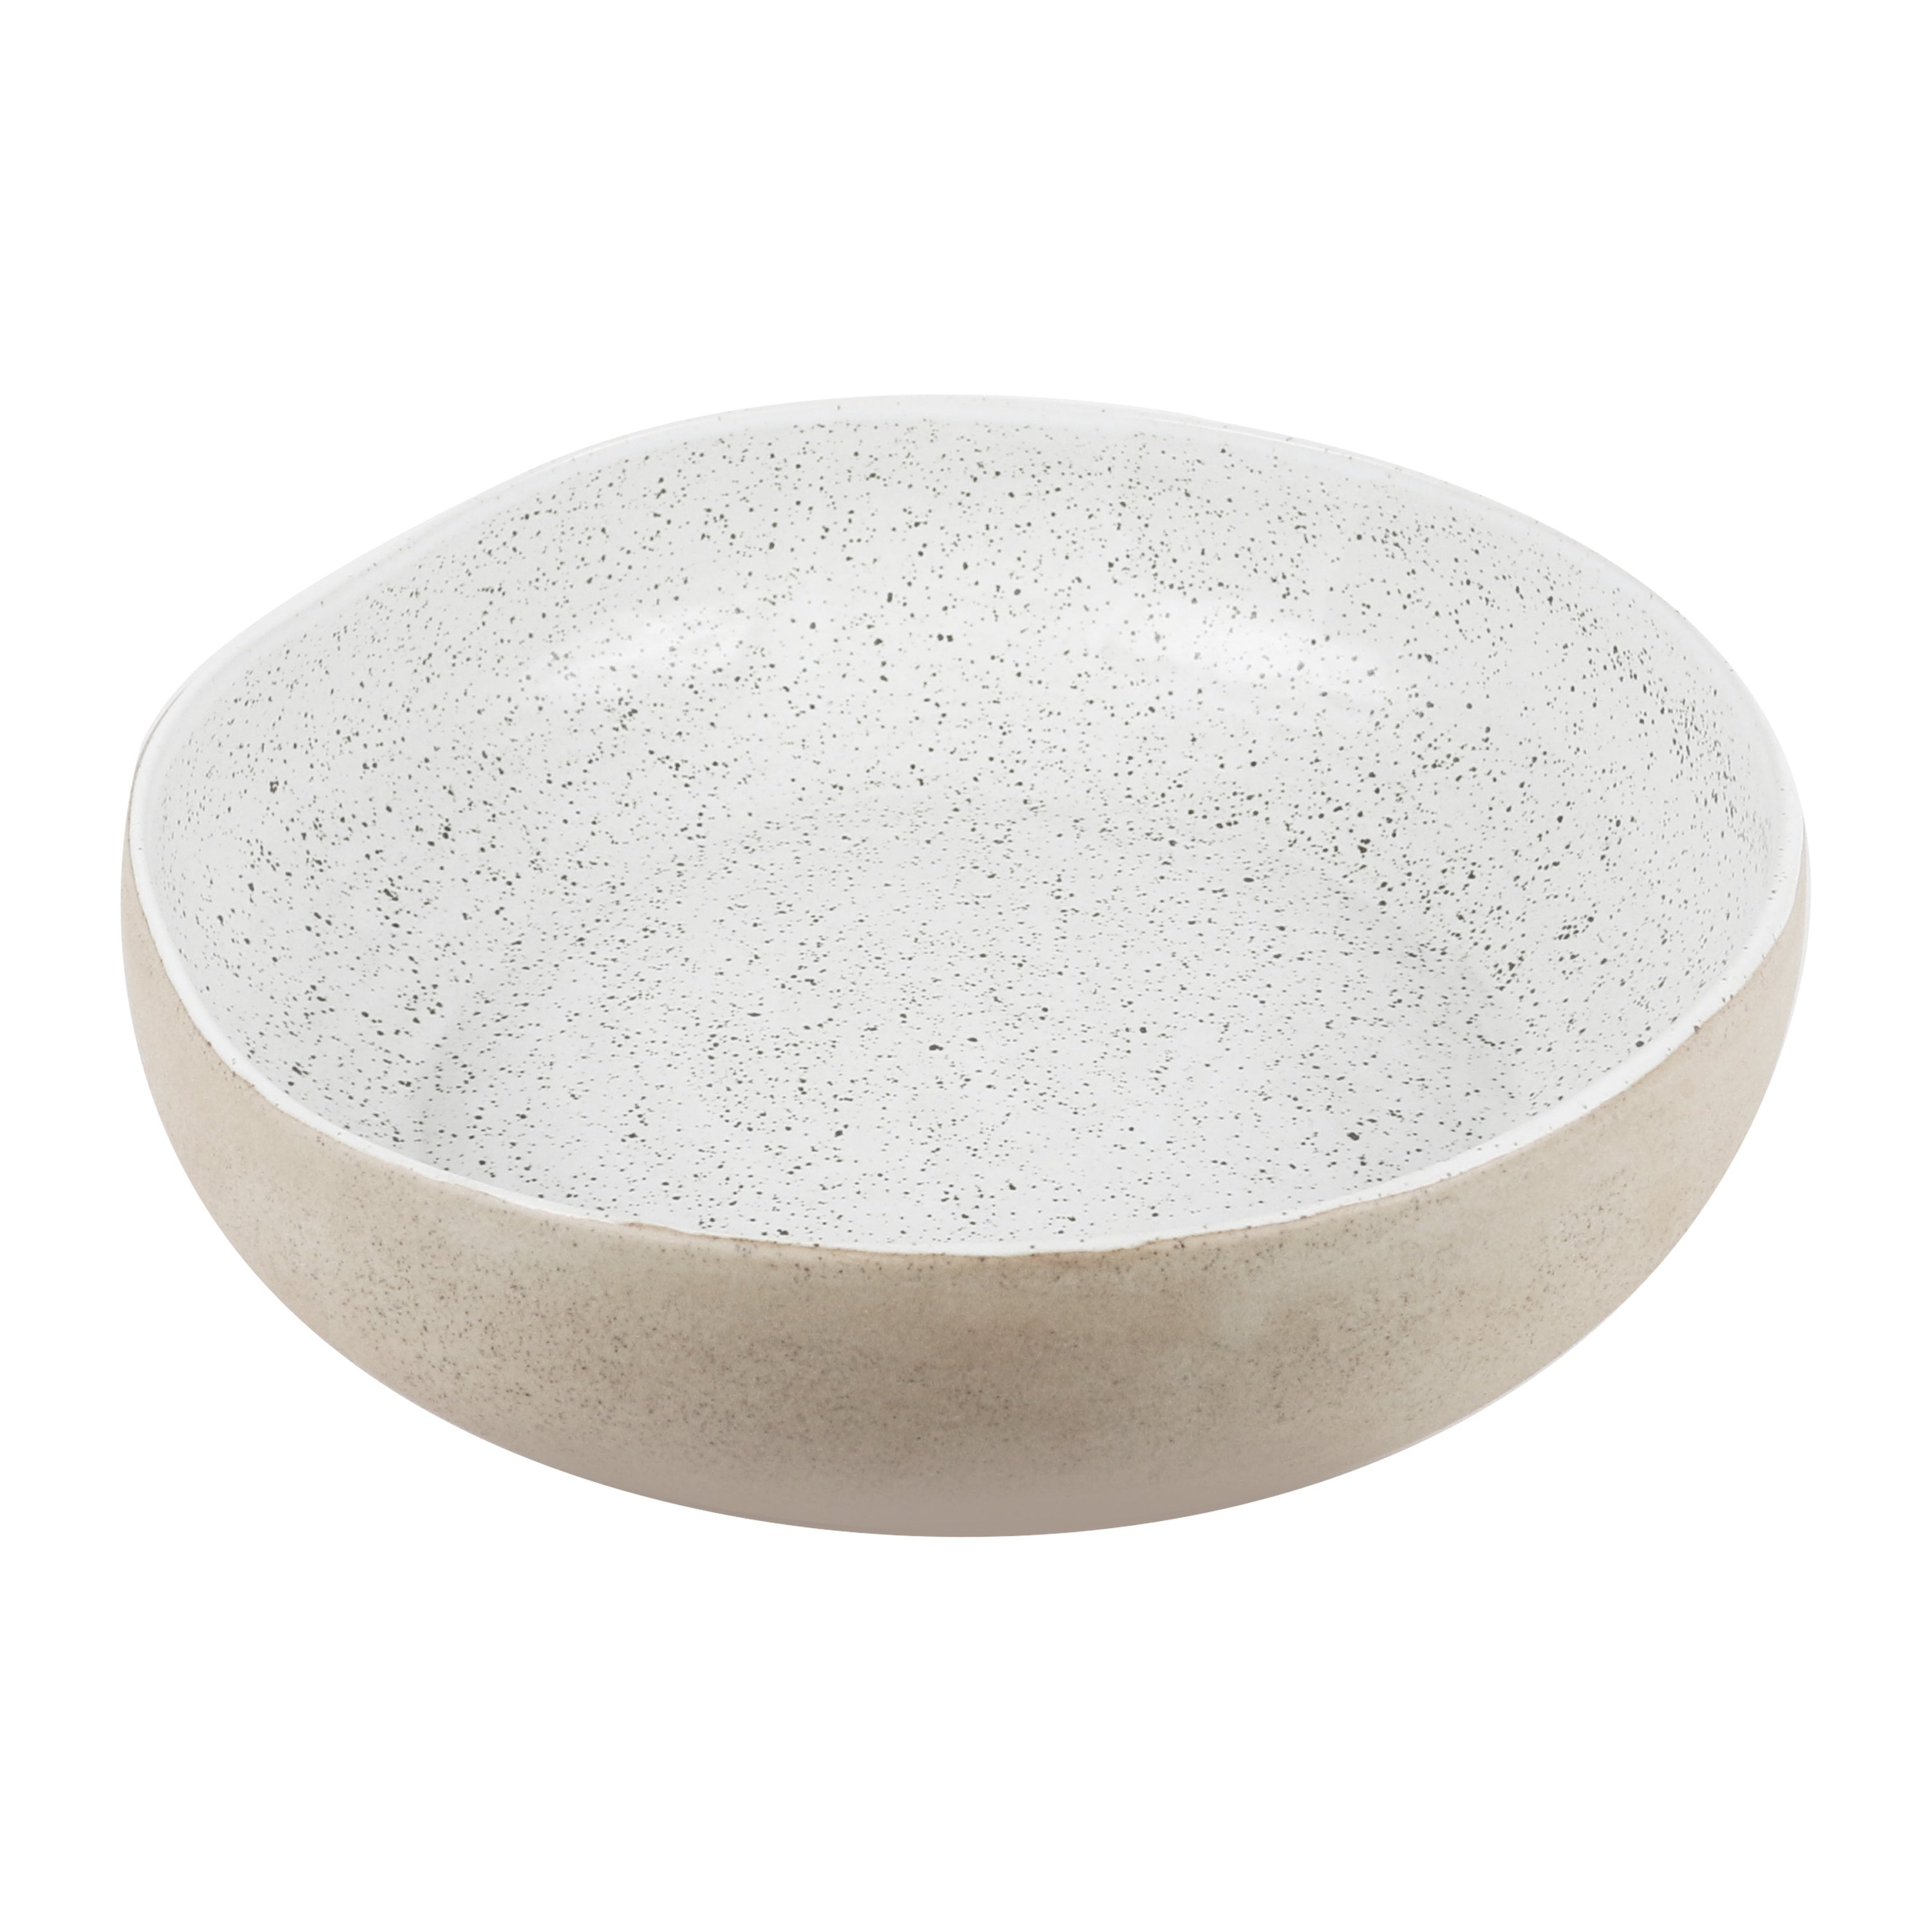 Serving Bowl Large | White Garden to Table